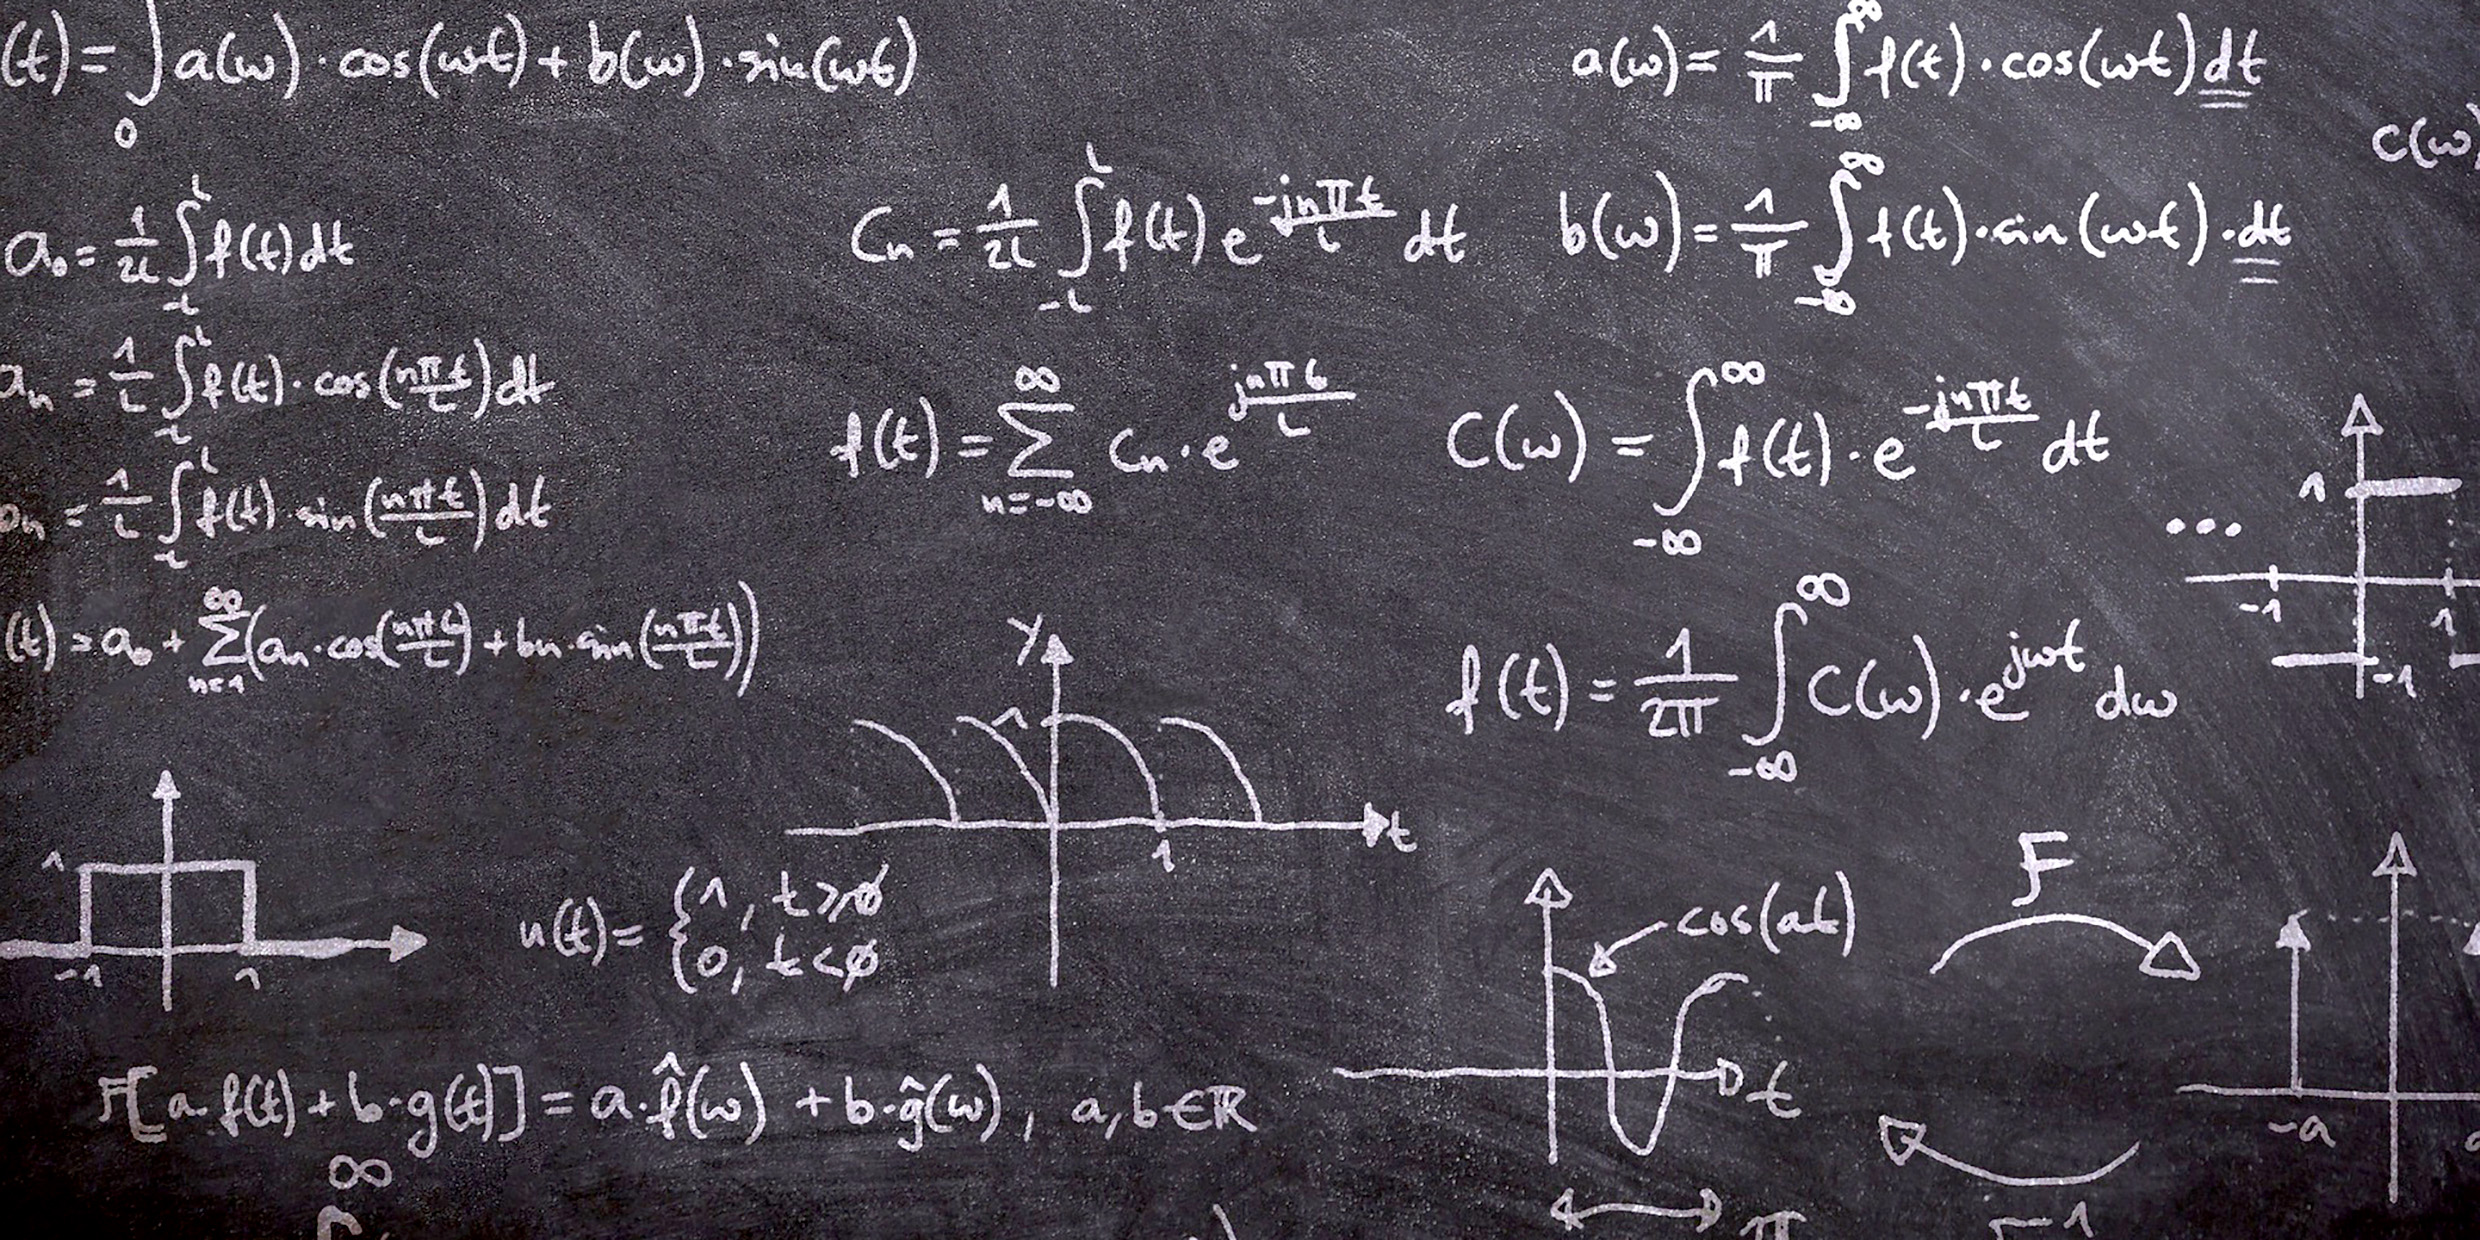 Image of blackboard covered in mathematical equations